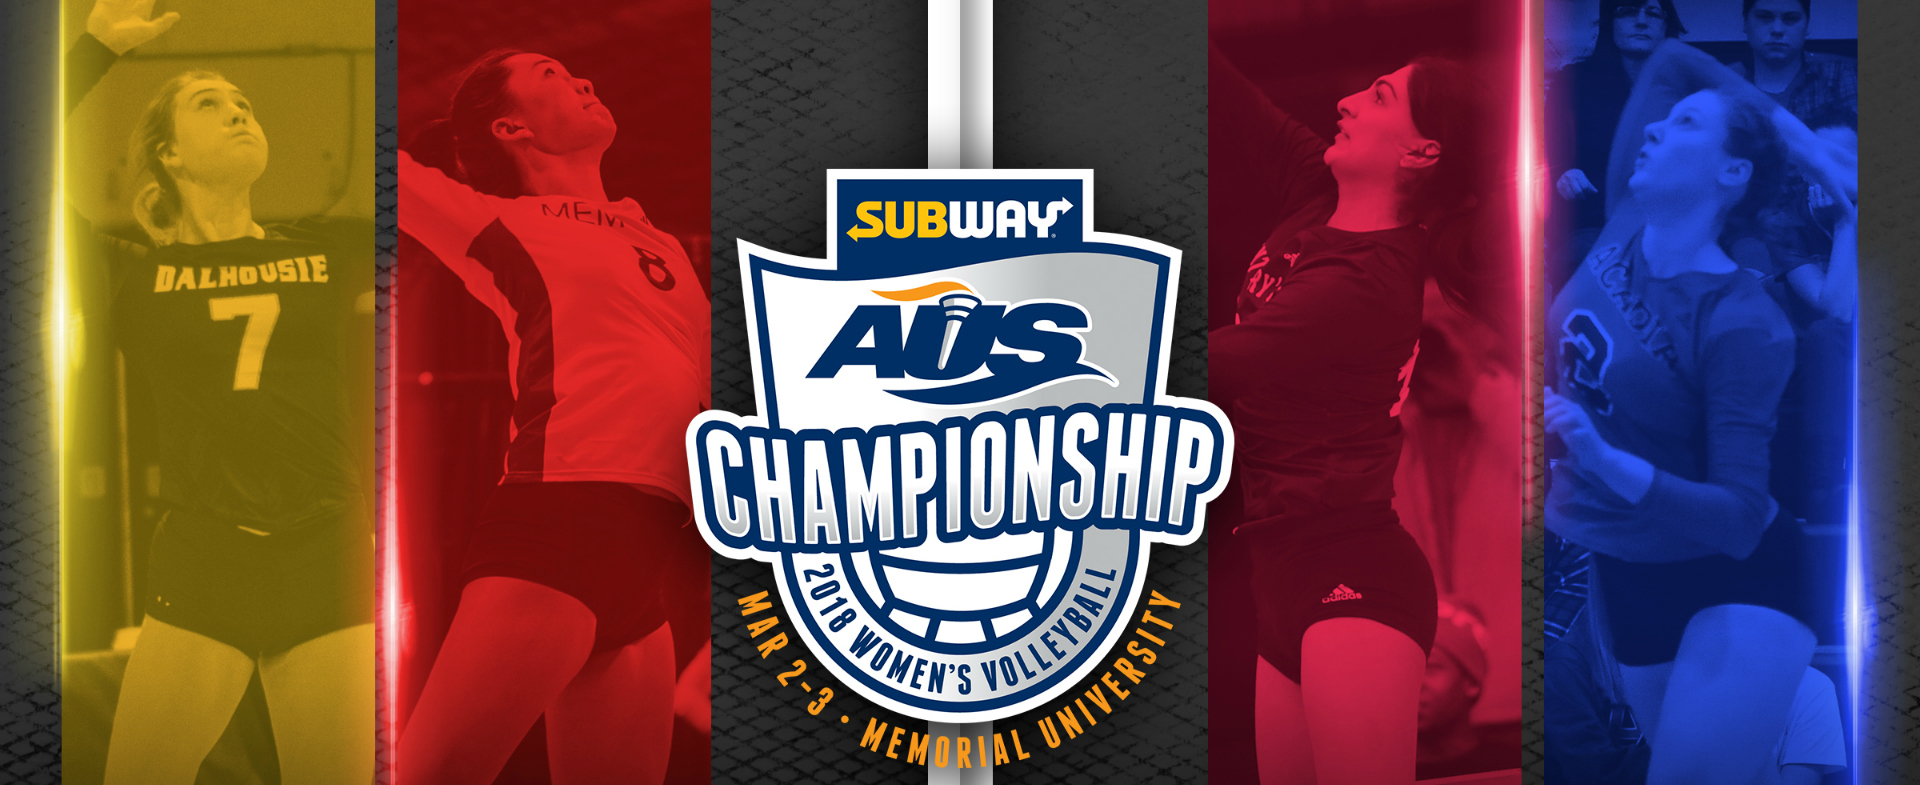 2018 AUS Women's Volleyball Championship Preview